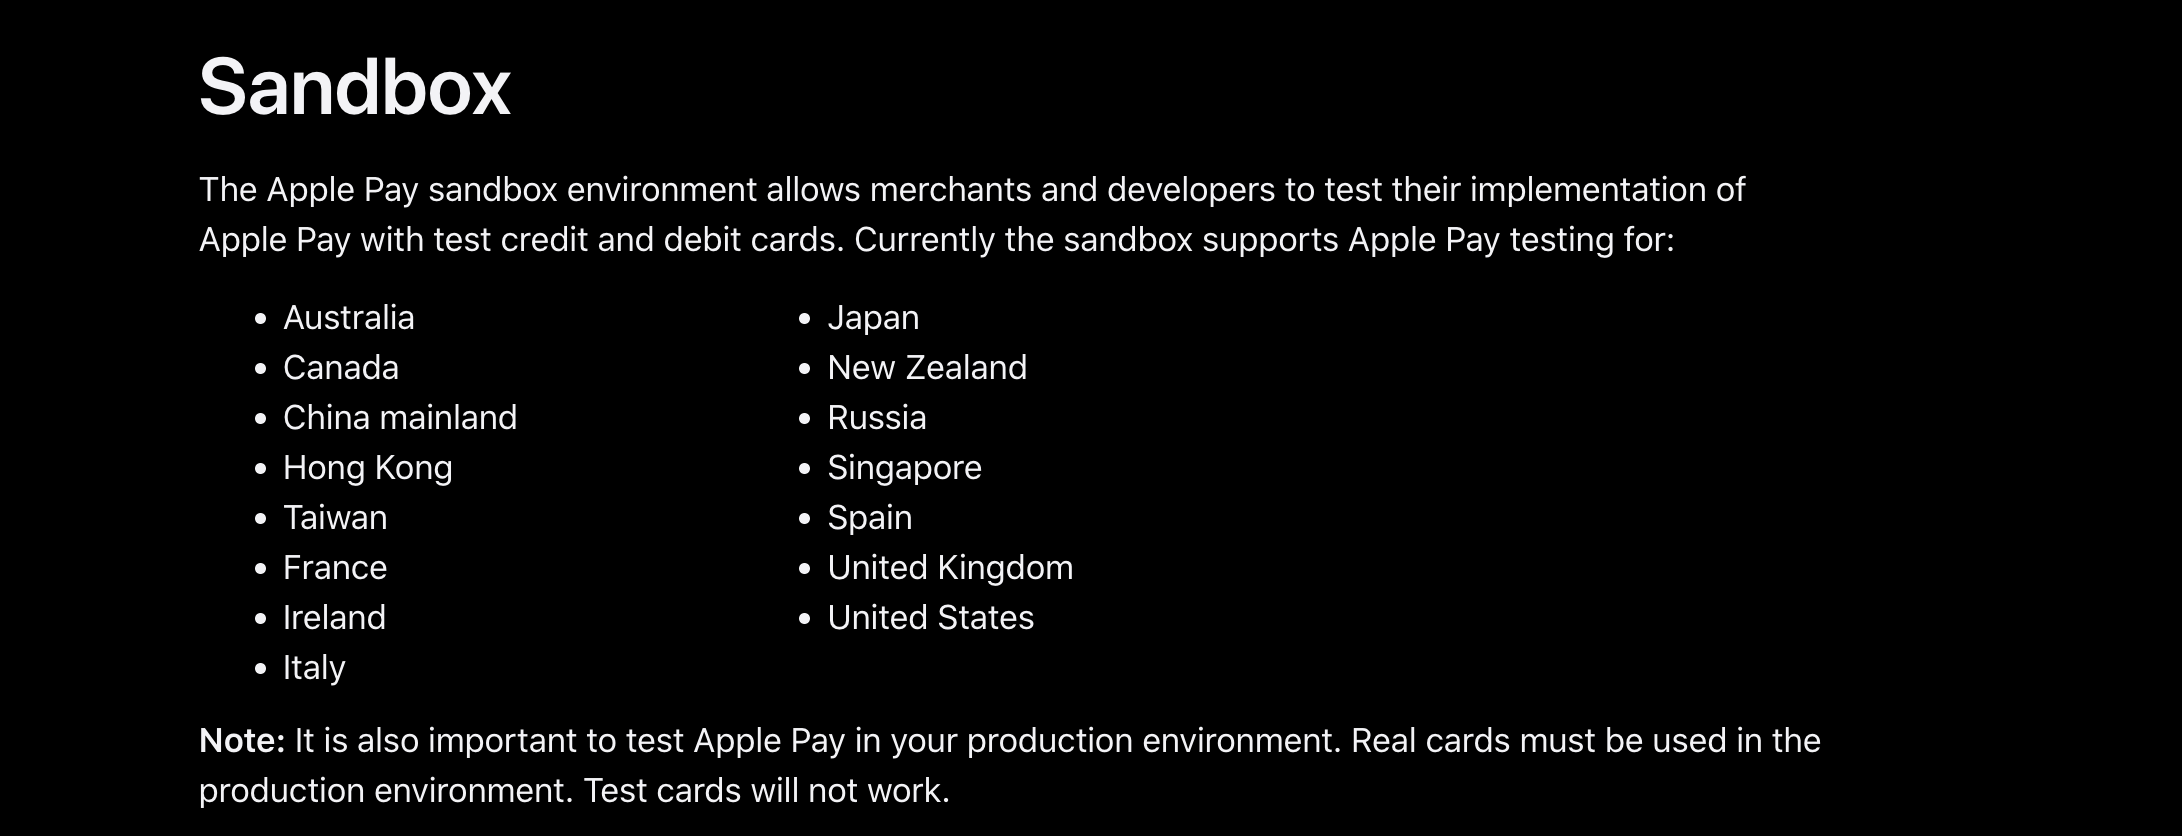 Apple Pay supported sandbox countries